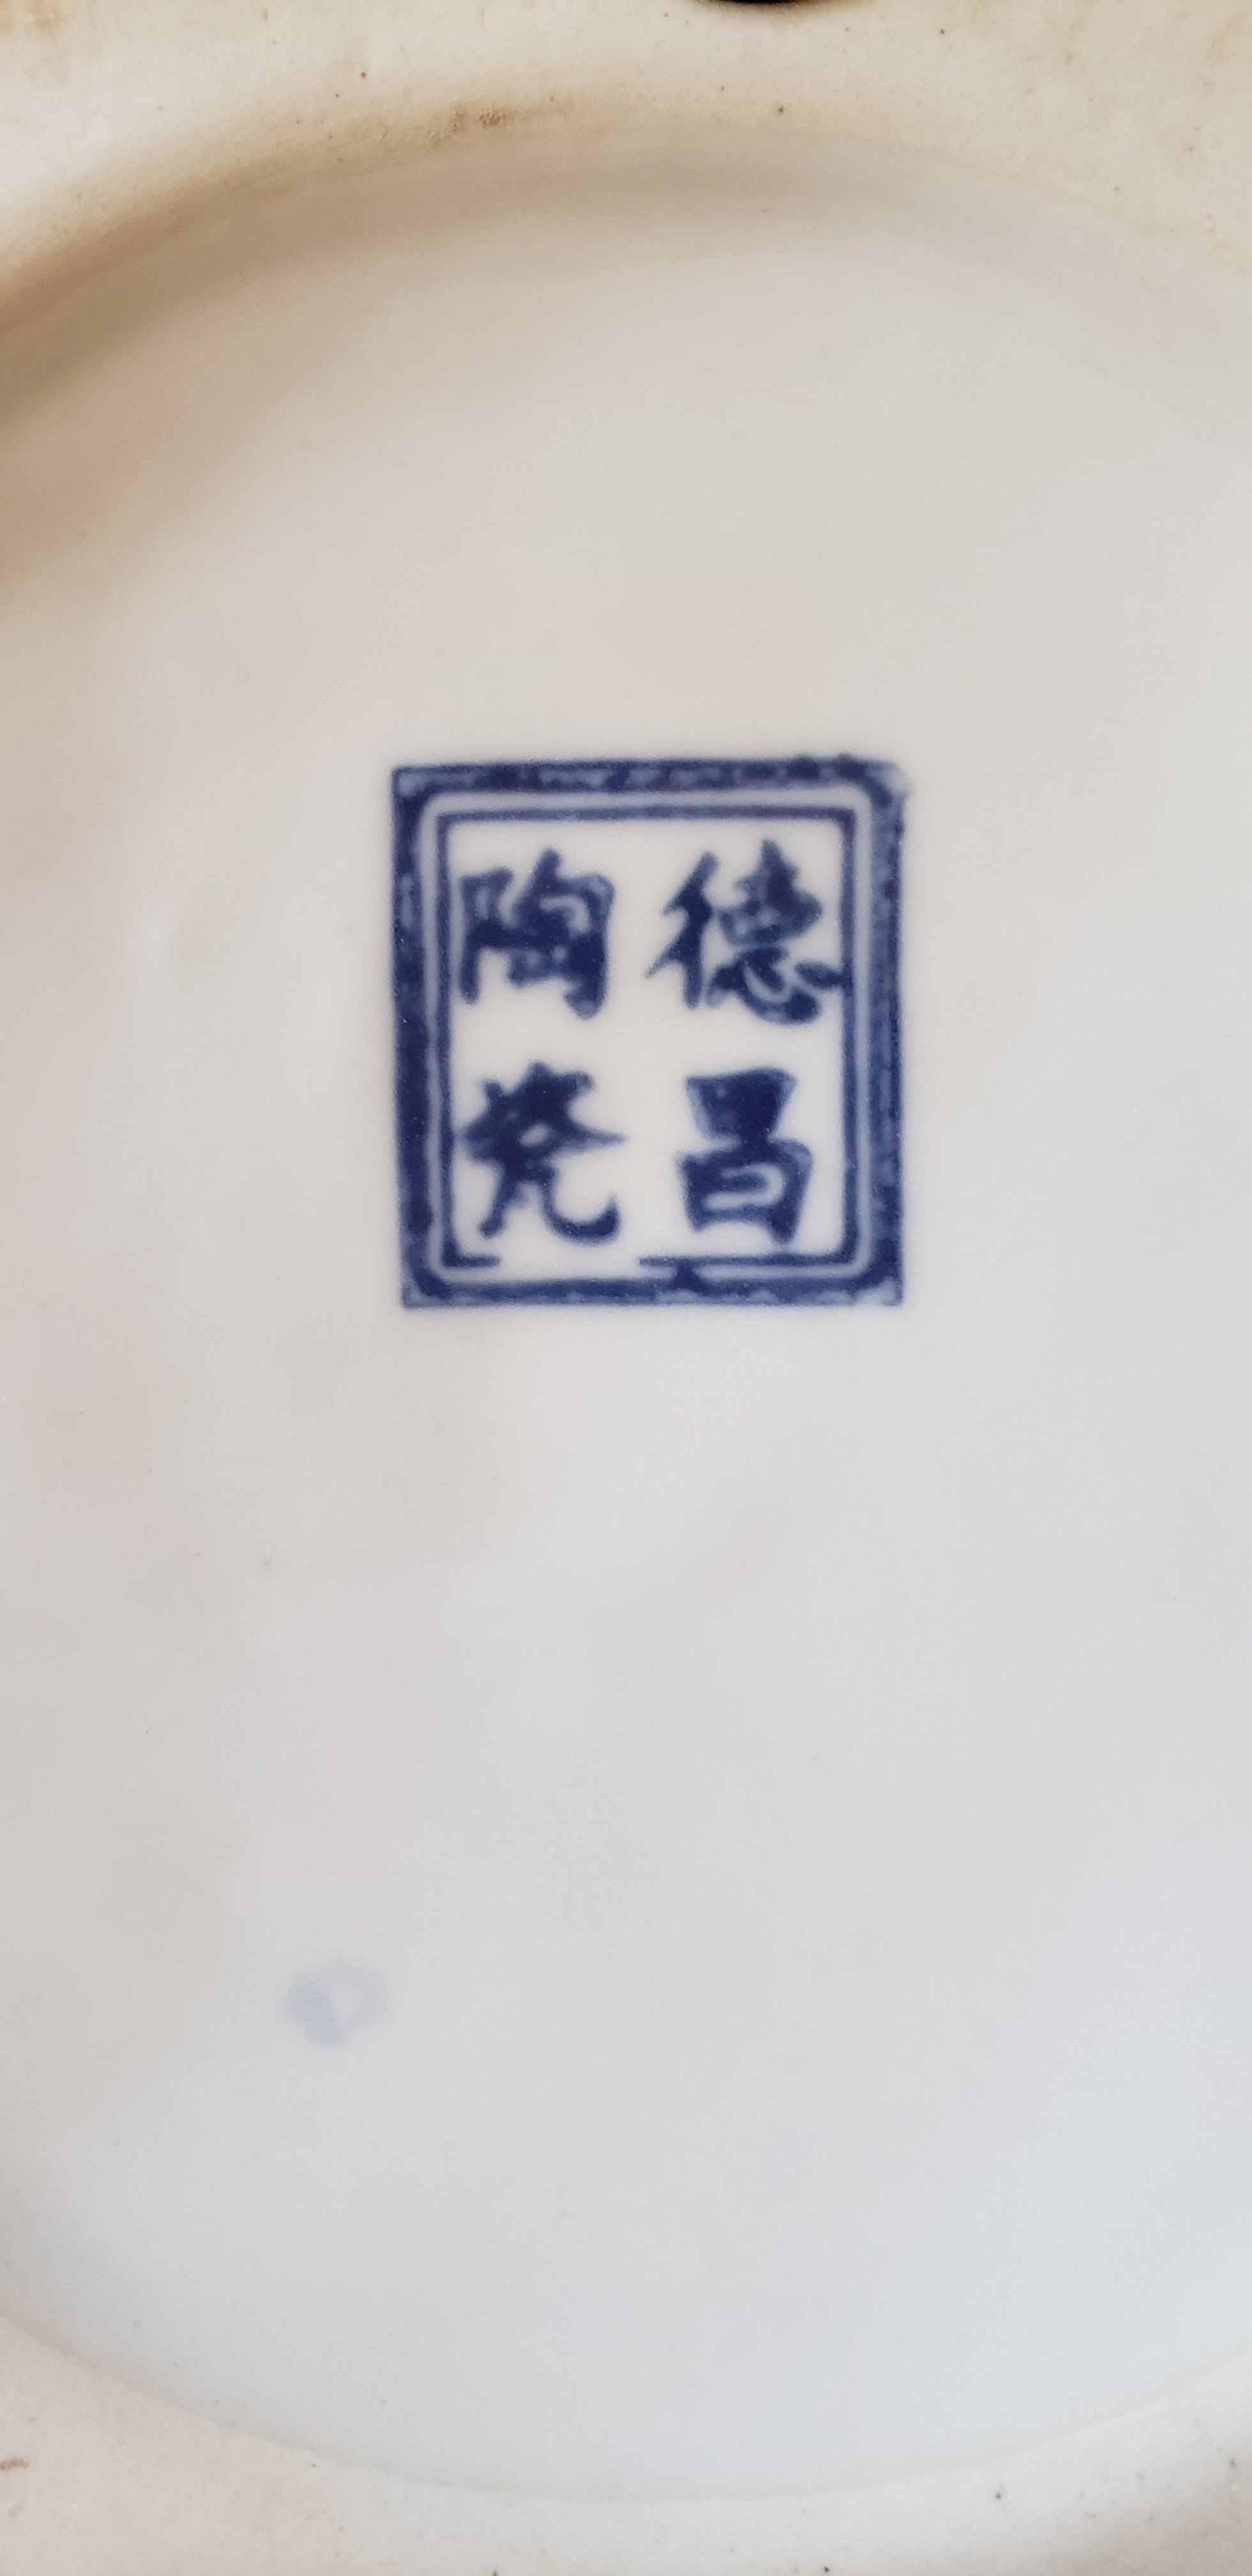 Chinese pottery marks